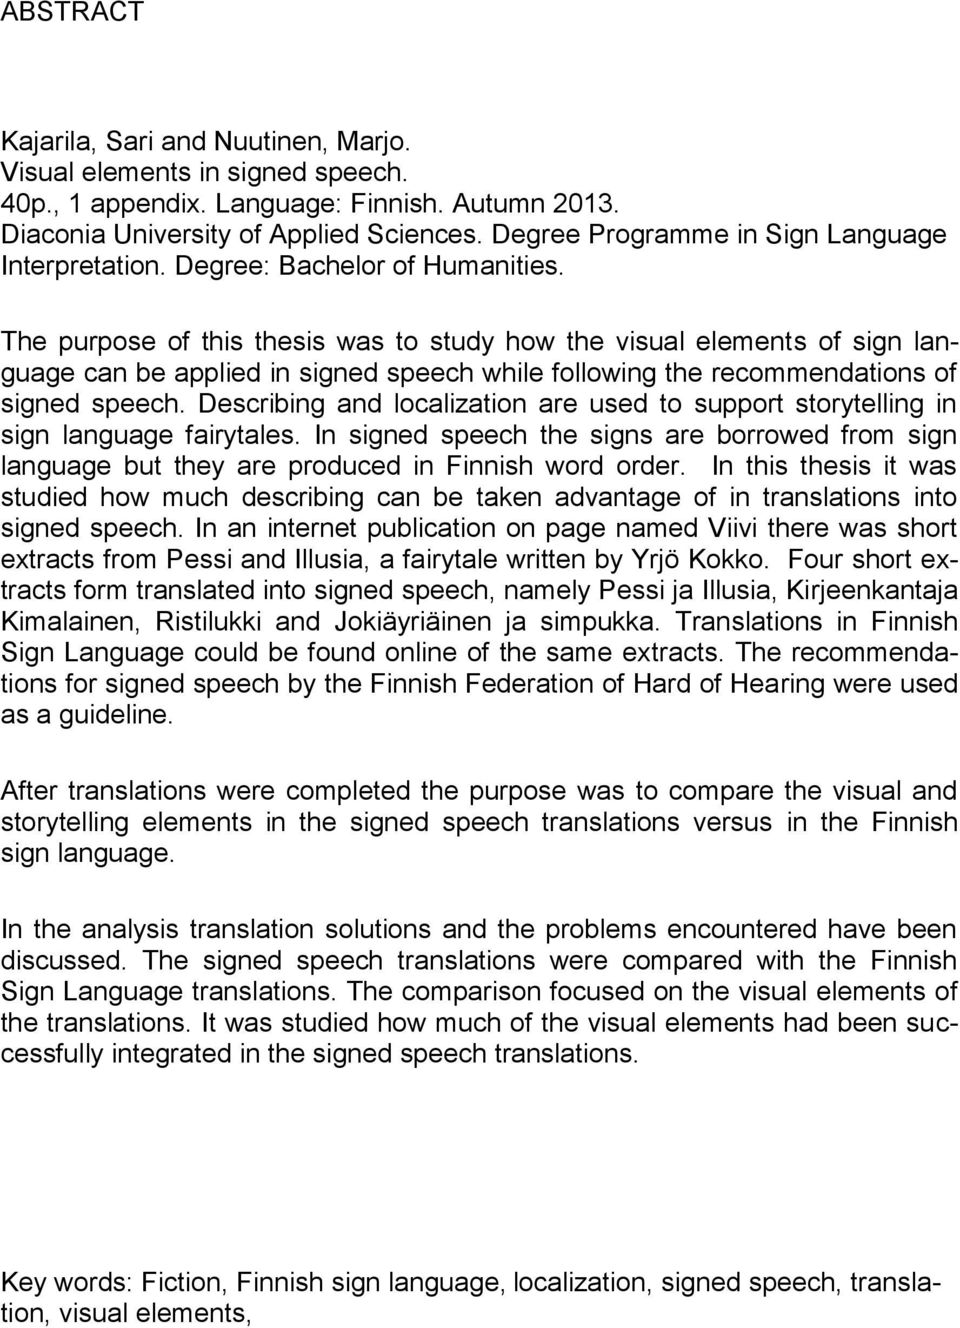 The purpose of this thesis was to study how the visual elements of sign language can be applied in signed speech while following the recommendations of signed speech.